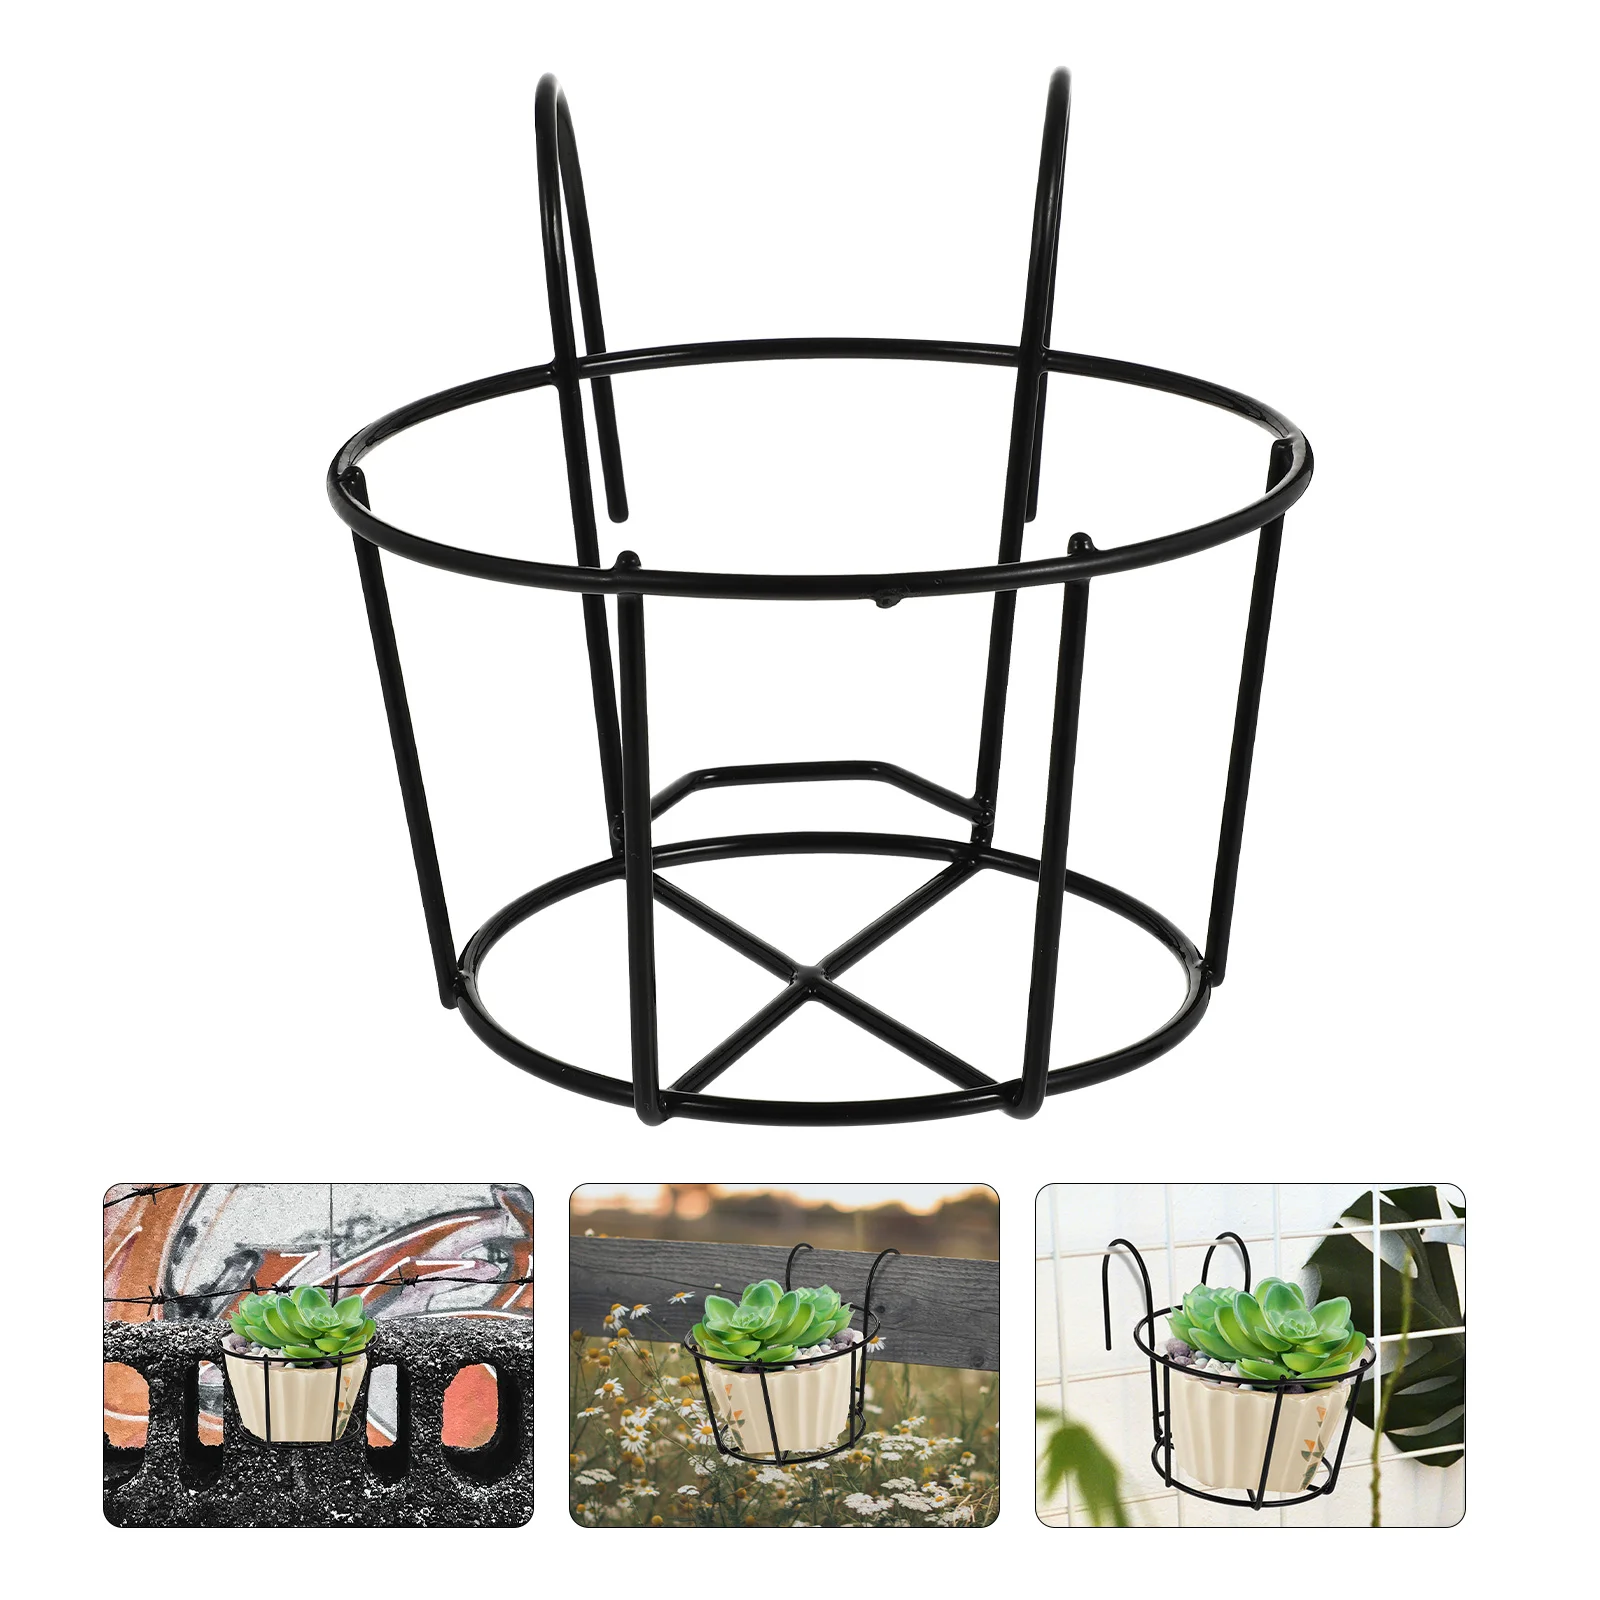 

Hanging Flower Holder Planter Fence Pot Railing Balcony Basket Over Baskets Hanger Deck Stand Rail Planters Iron Wall Potted